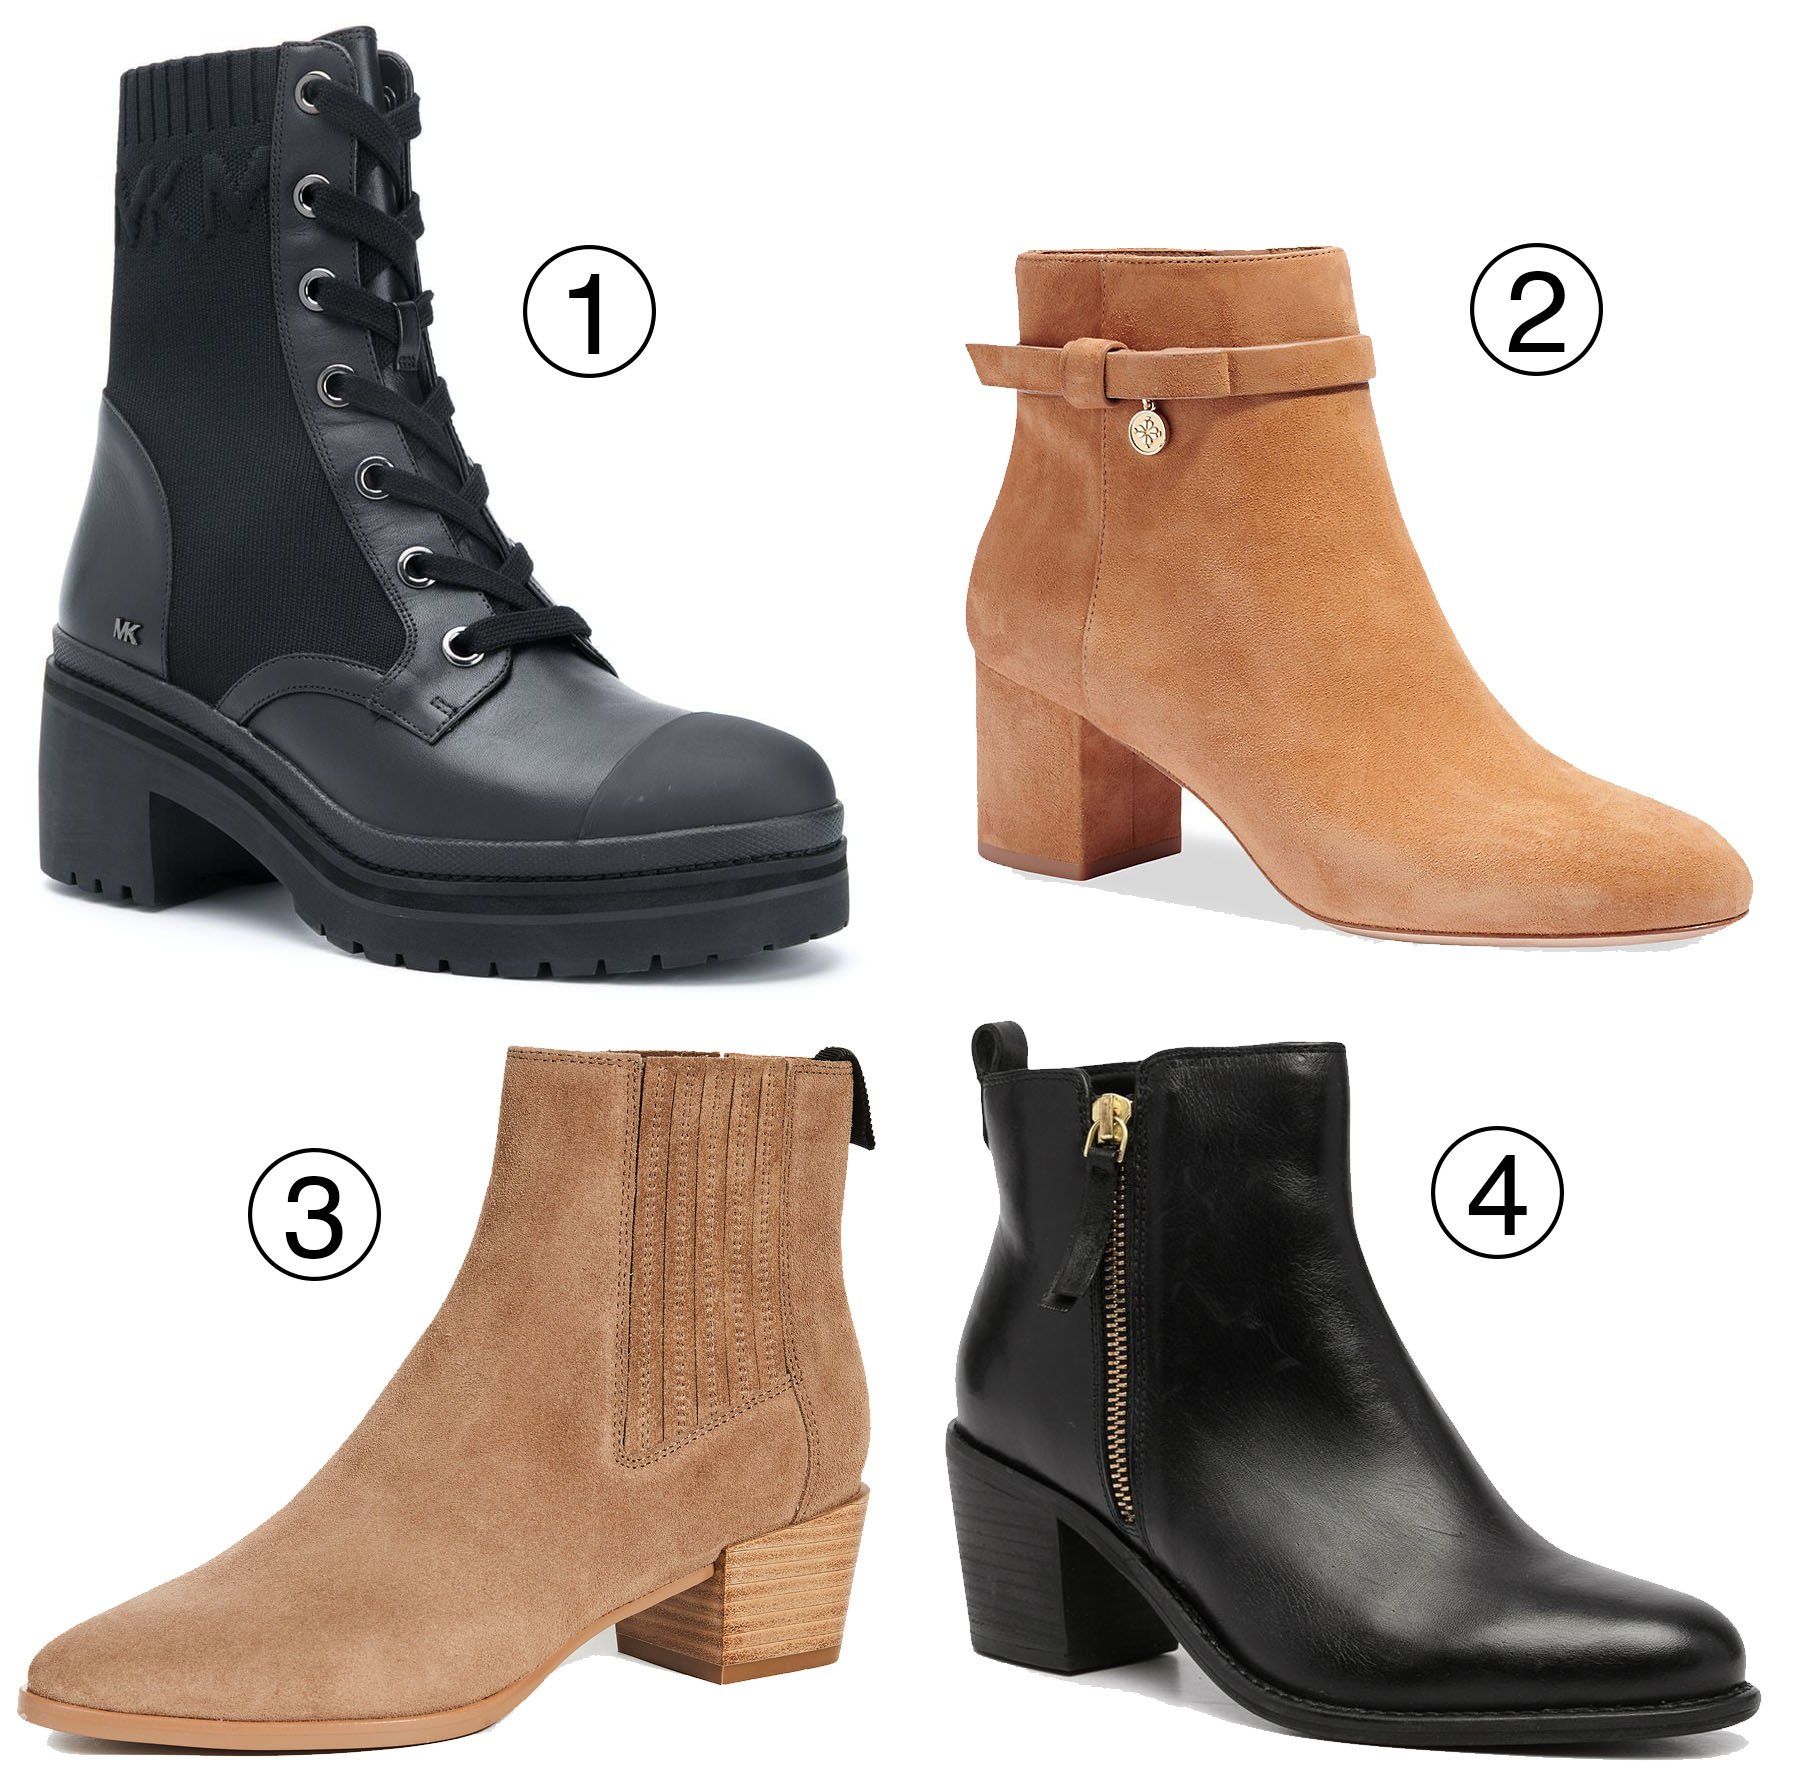 1. MICHAEL Michael Kors knitted-panel ankle boots; 2. Kate Spade New York Delina suede ankle boots; 3. Rag & Bone Rover booties; 4. Carvela Secil ankle boots